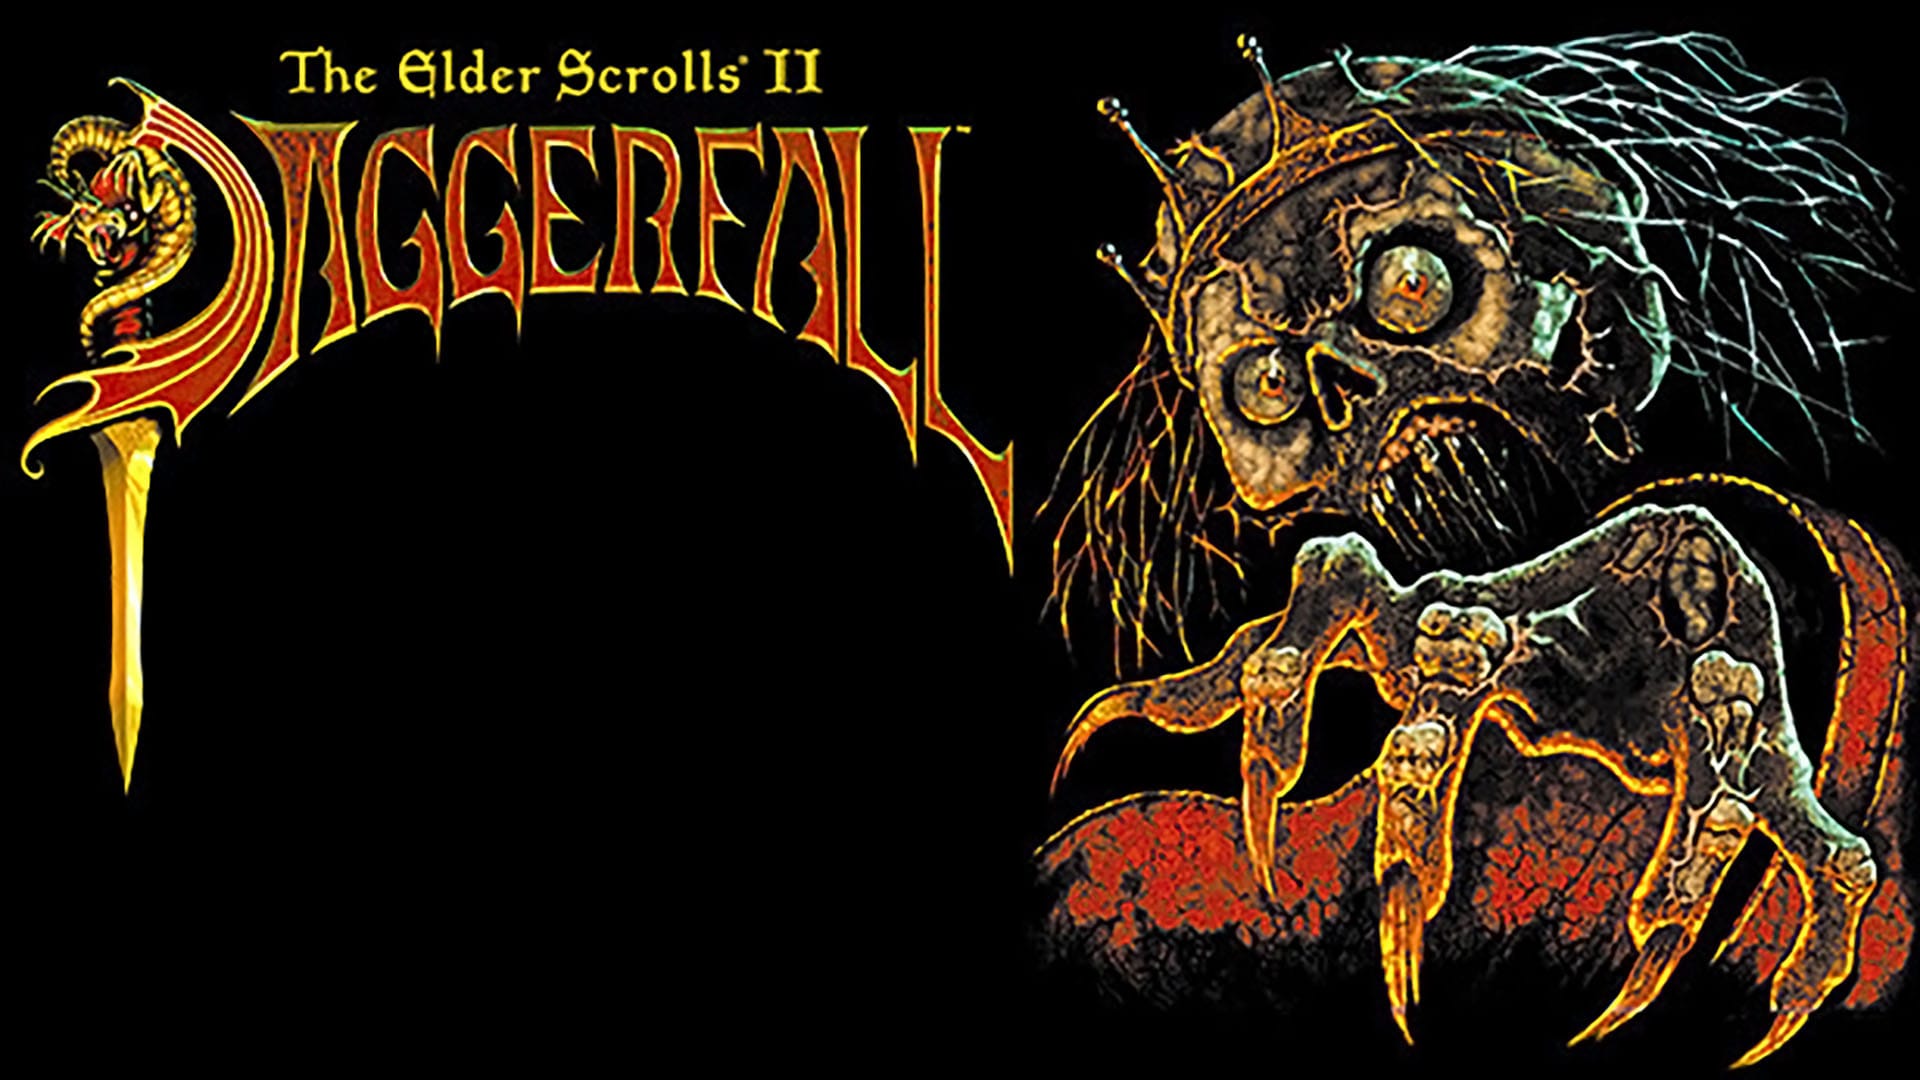 Daggerfall Unity 1.0.0 Released For Free, Bringing Back the Elder Scrolls Game in a Modern Engine